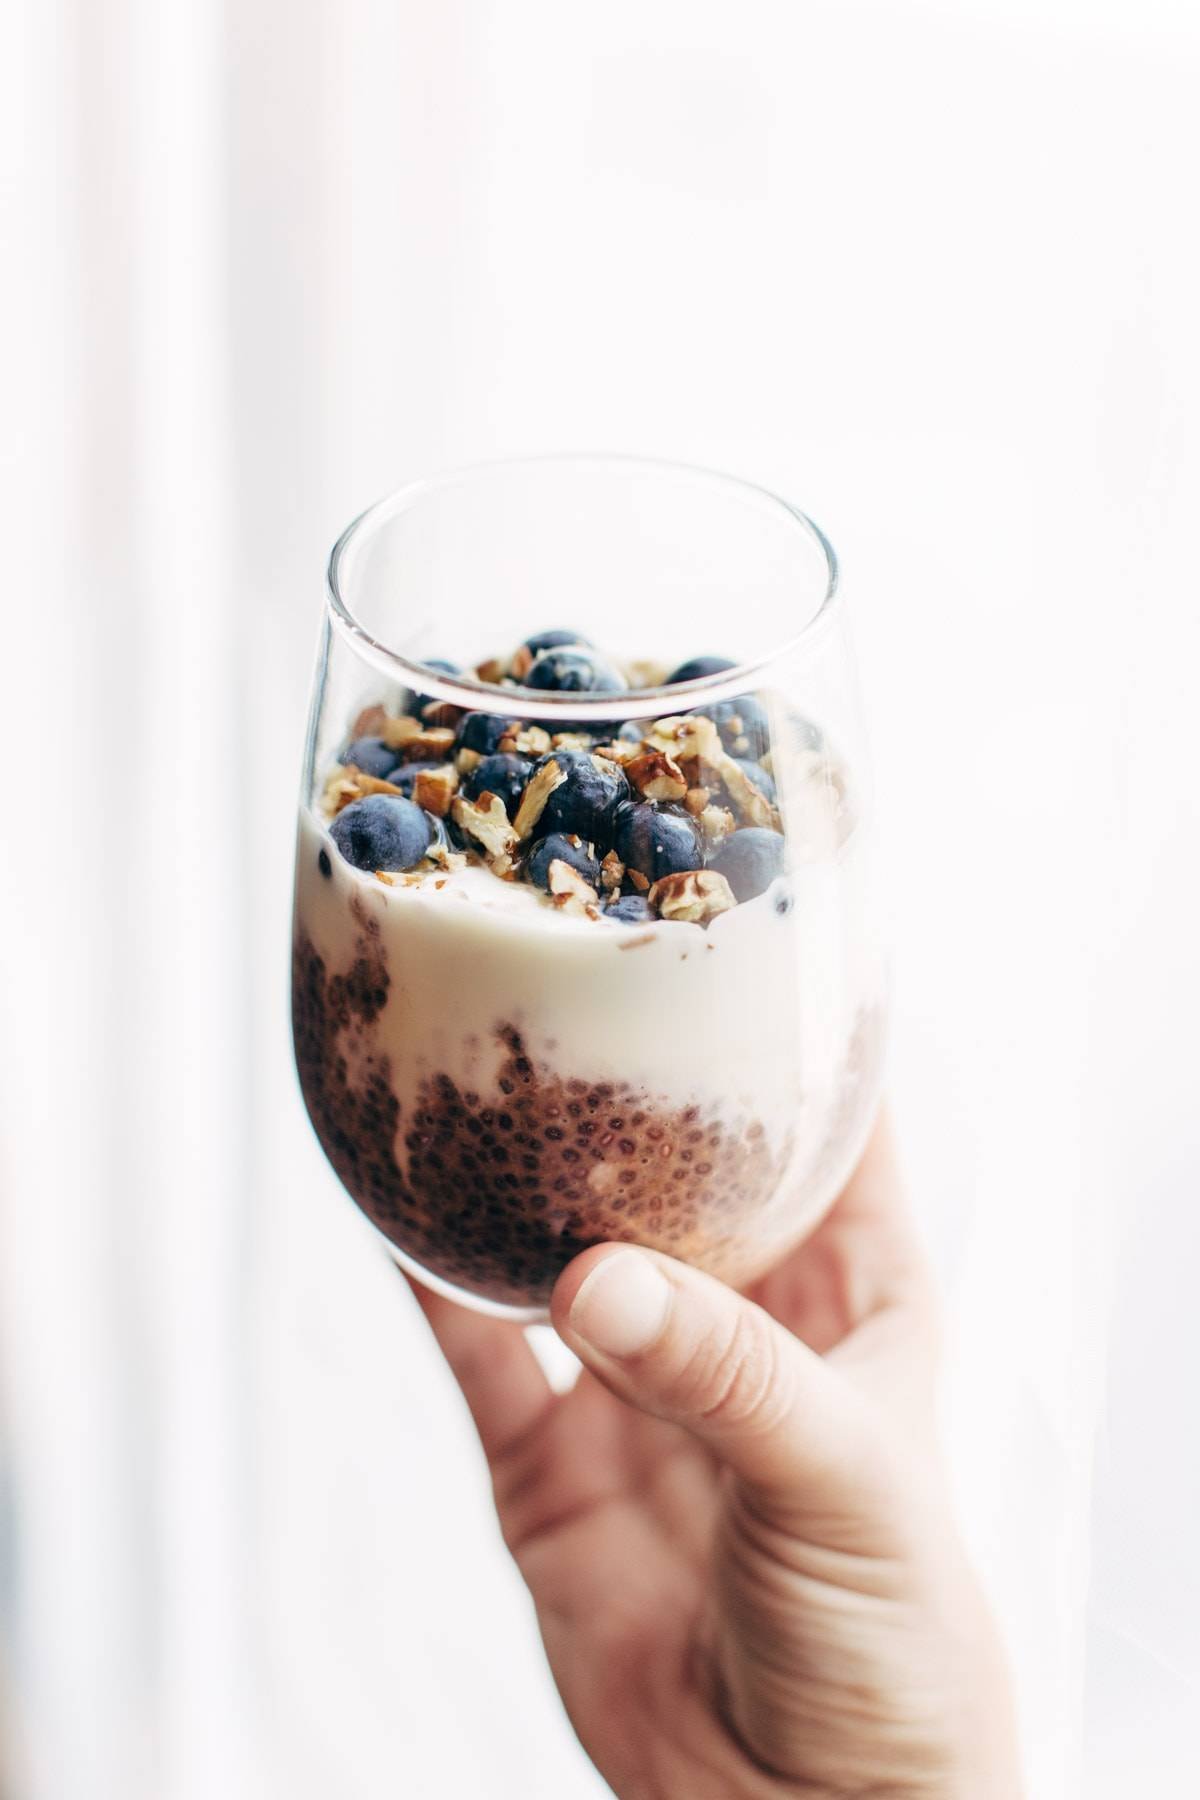 Hand holding Berry Chia Overnight Oats in a glass.